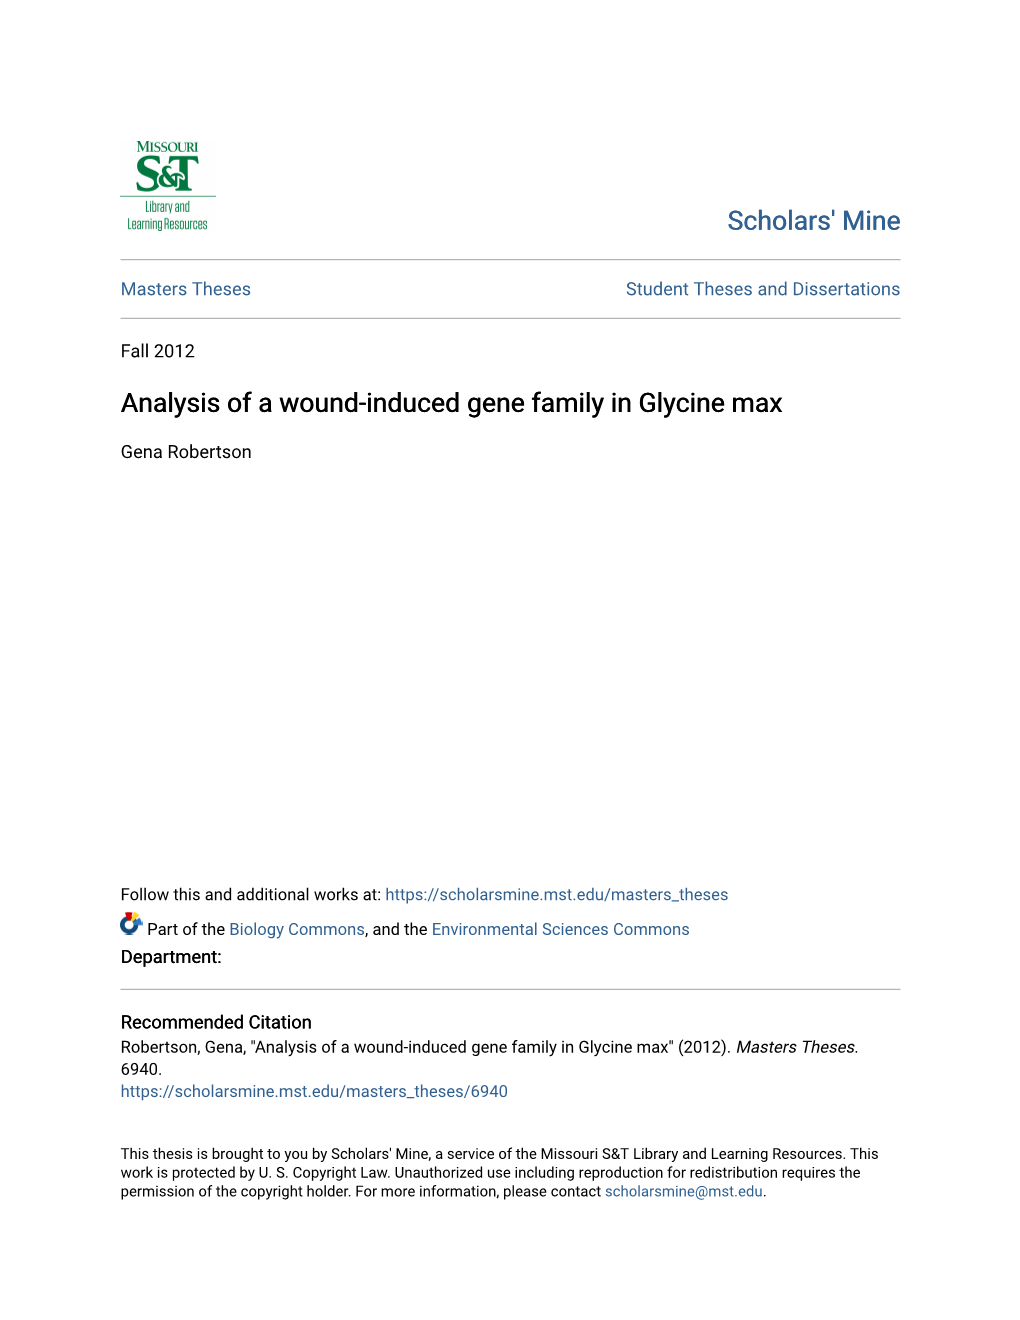 Analysis of a Wound-Induced Gene Family in Glycine Max